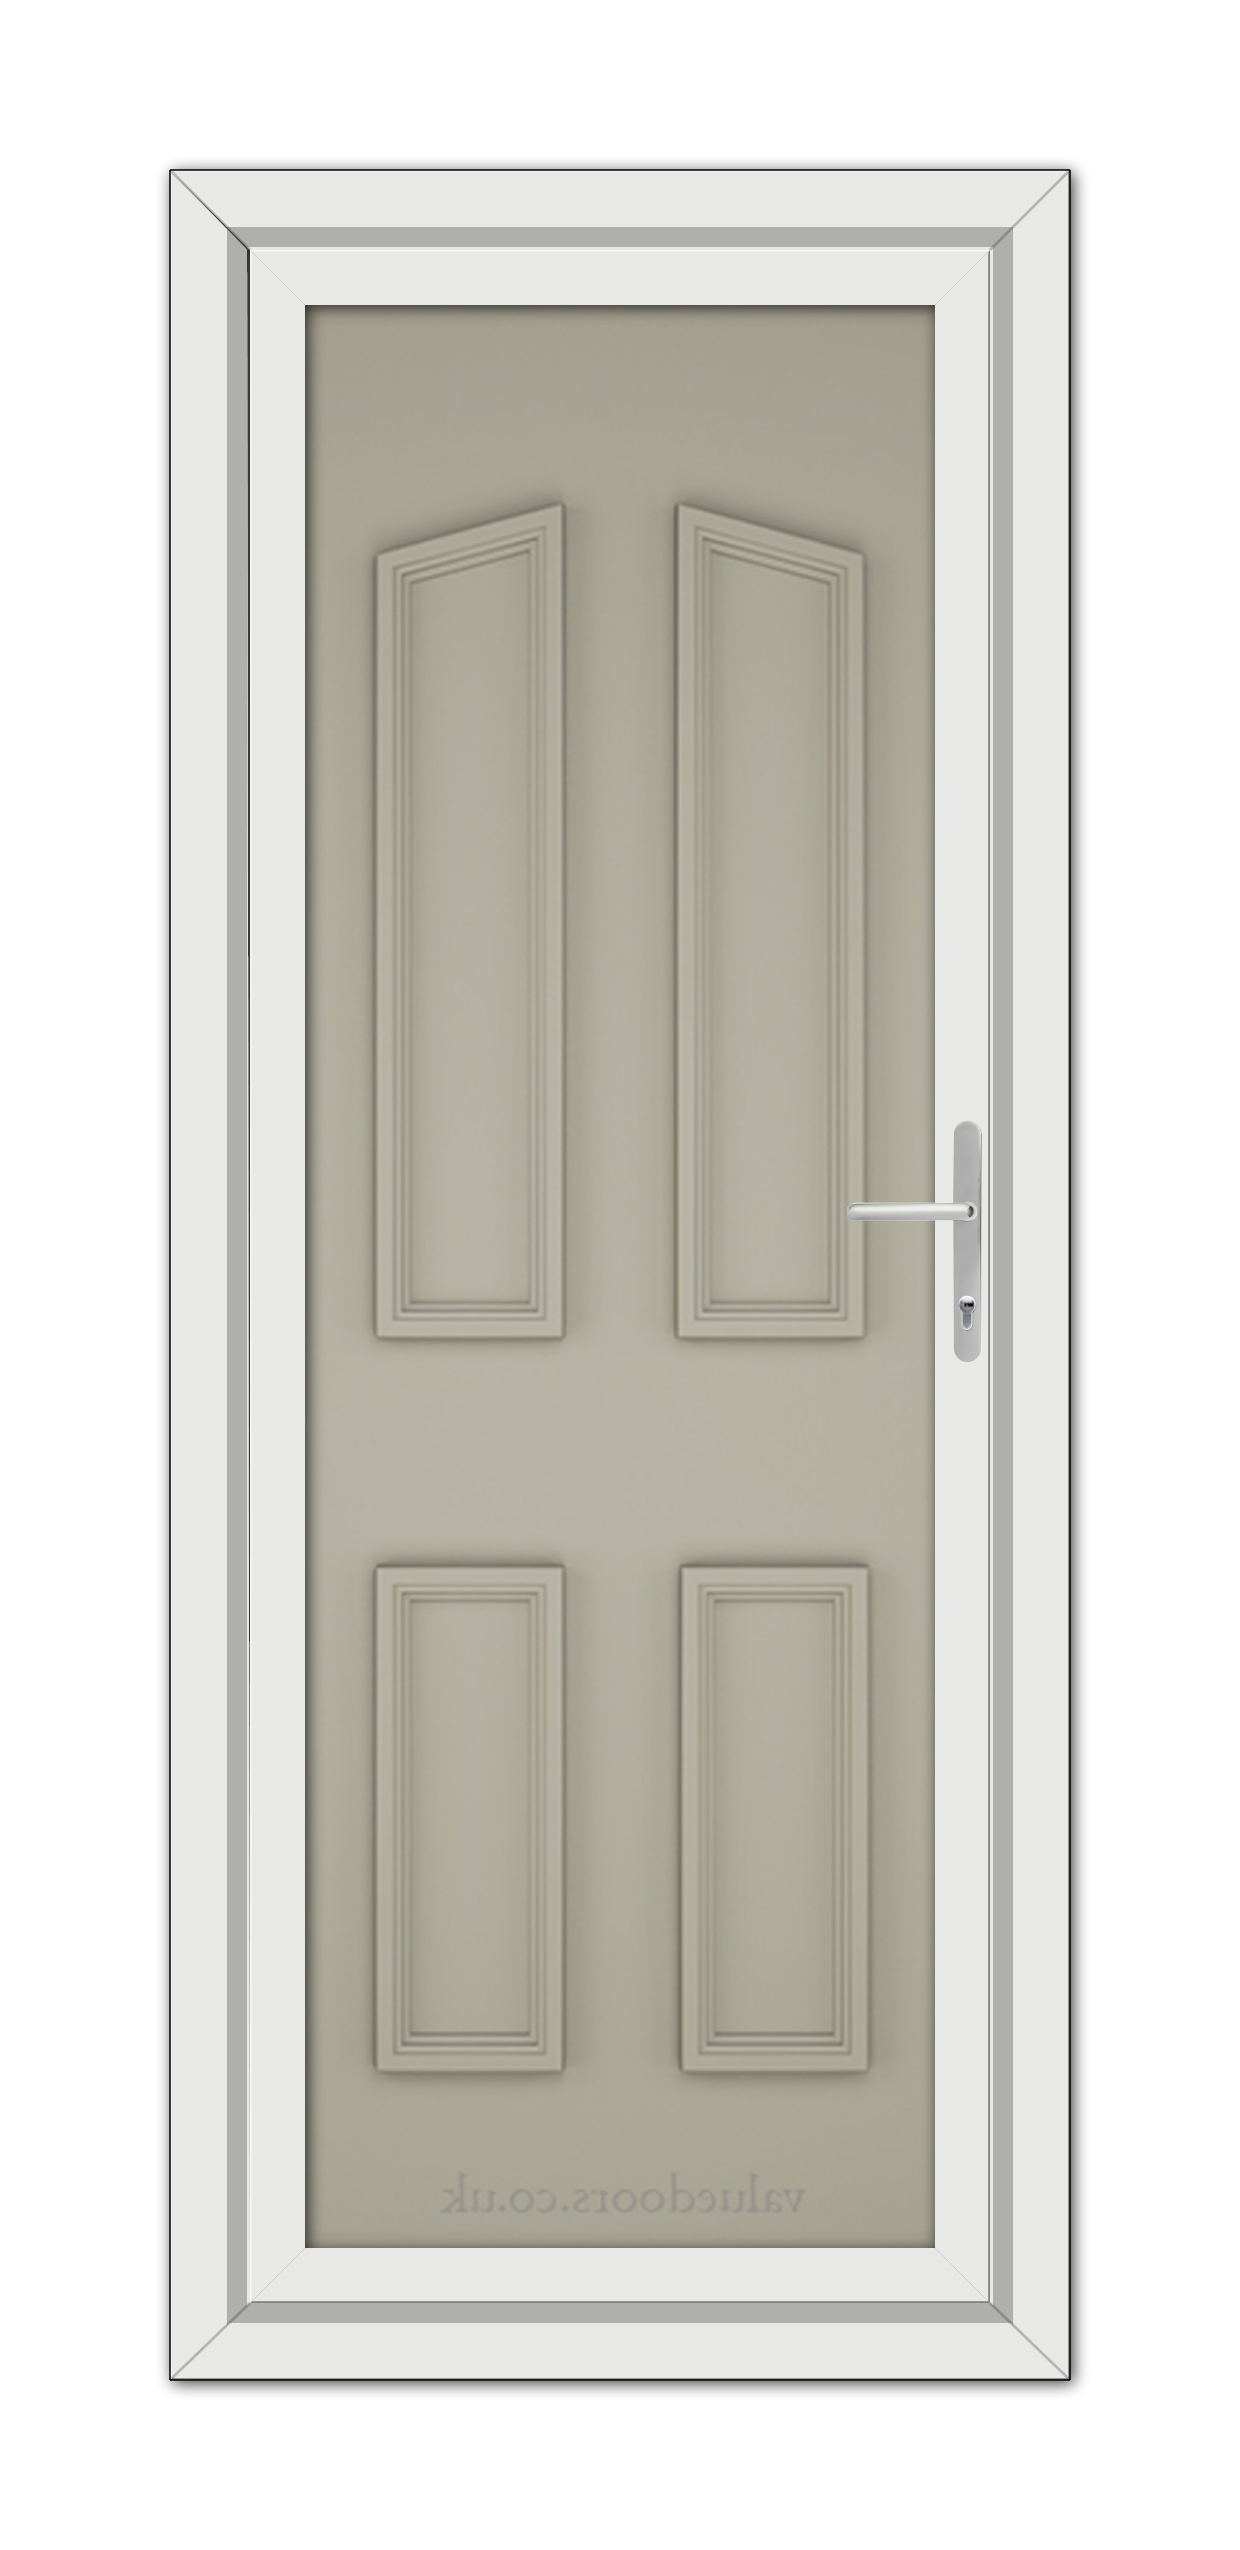 A vertical image of a closed, Pebble Grey Kensington Solid uPVC Door with four panels and a white handle, set within a white frame.